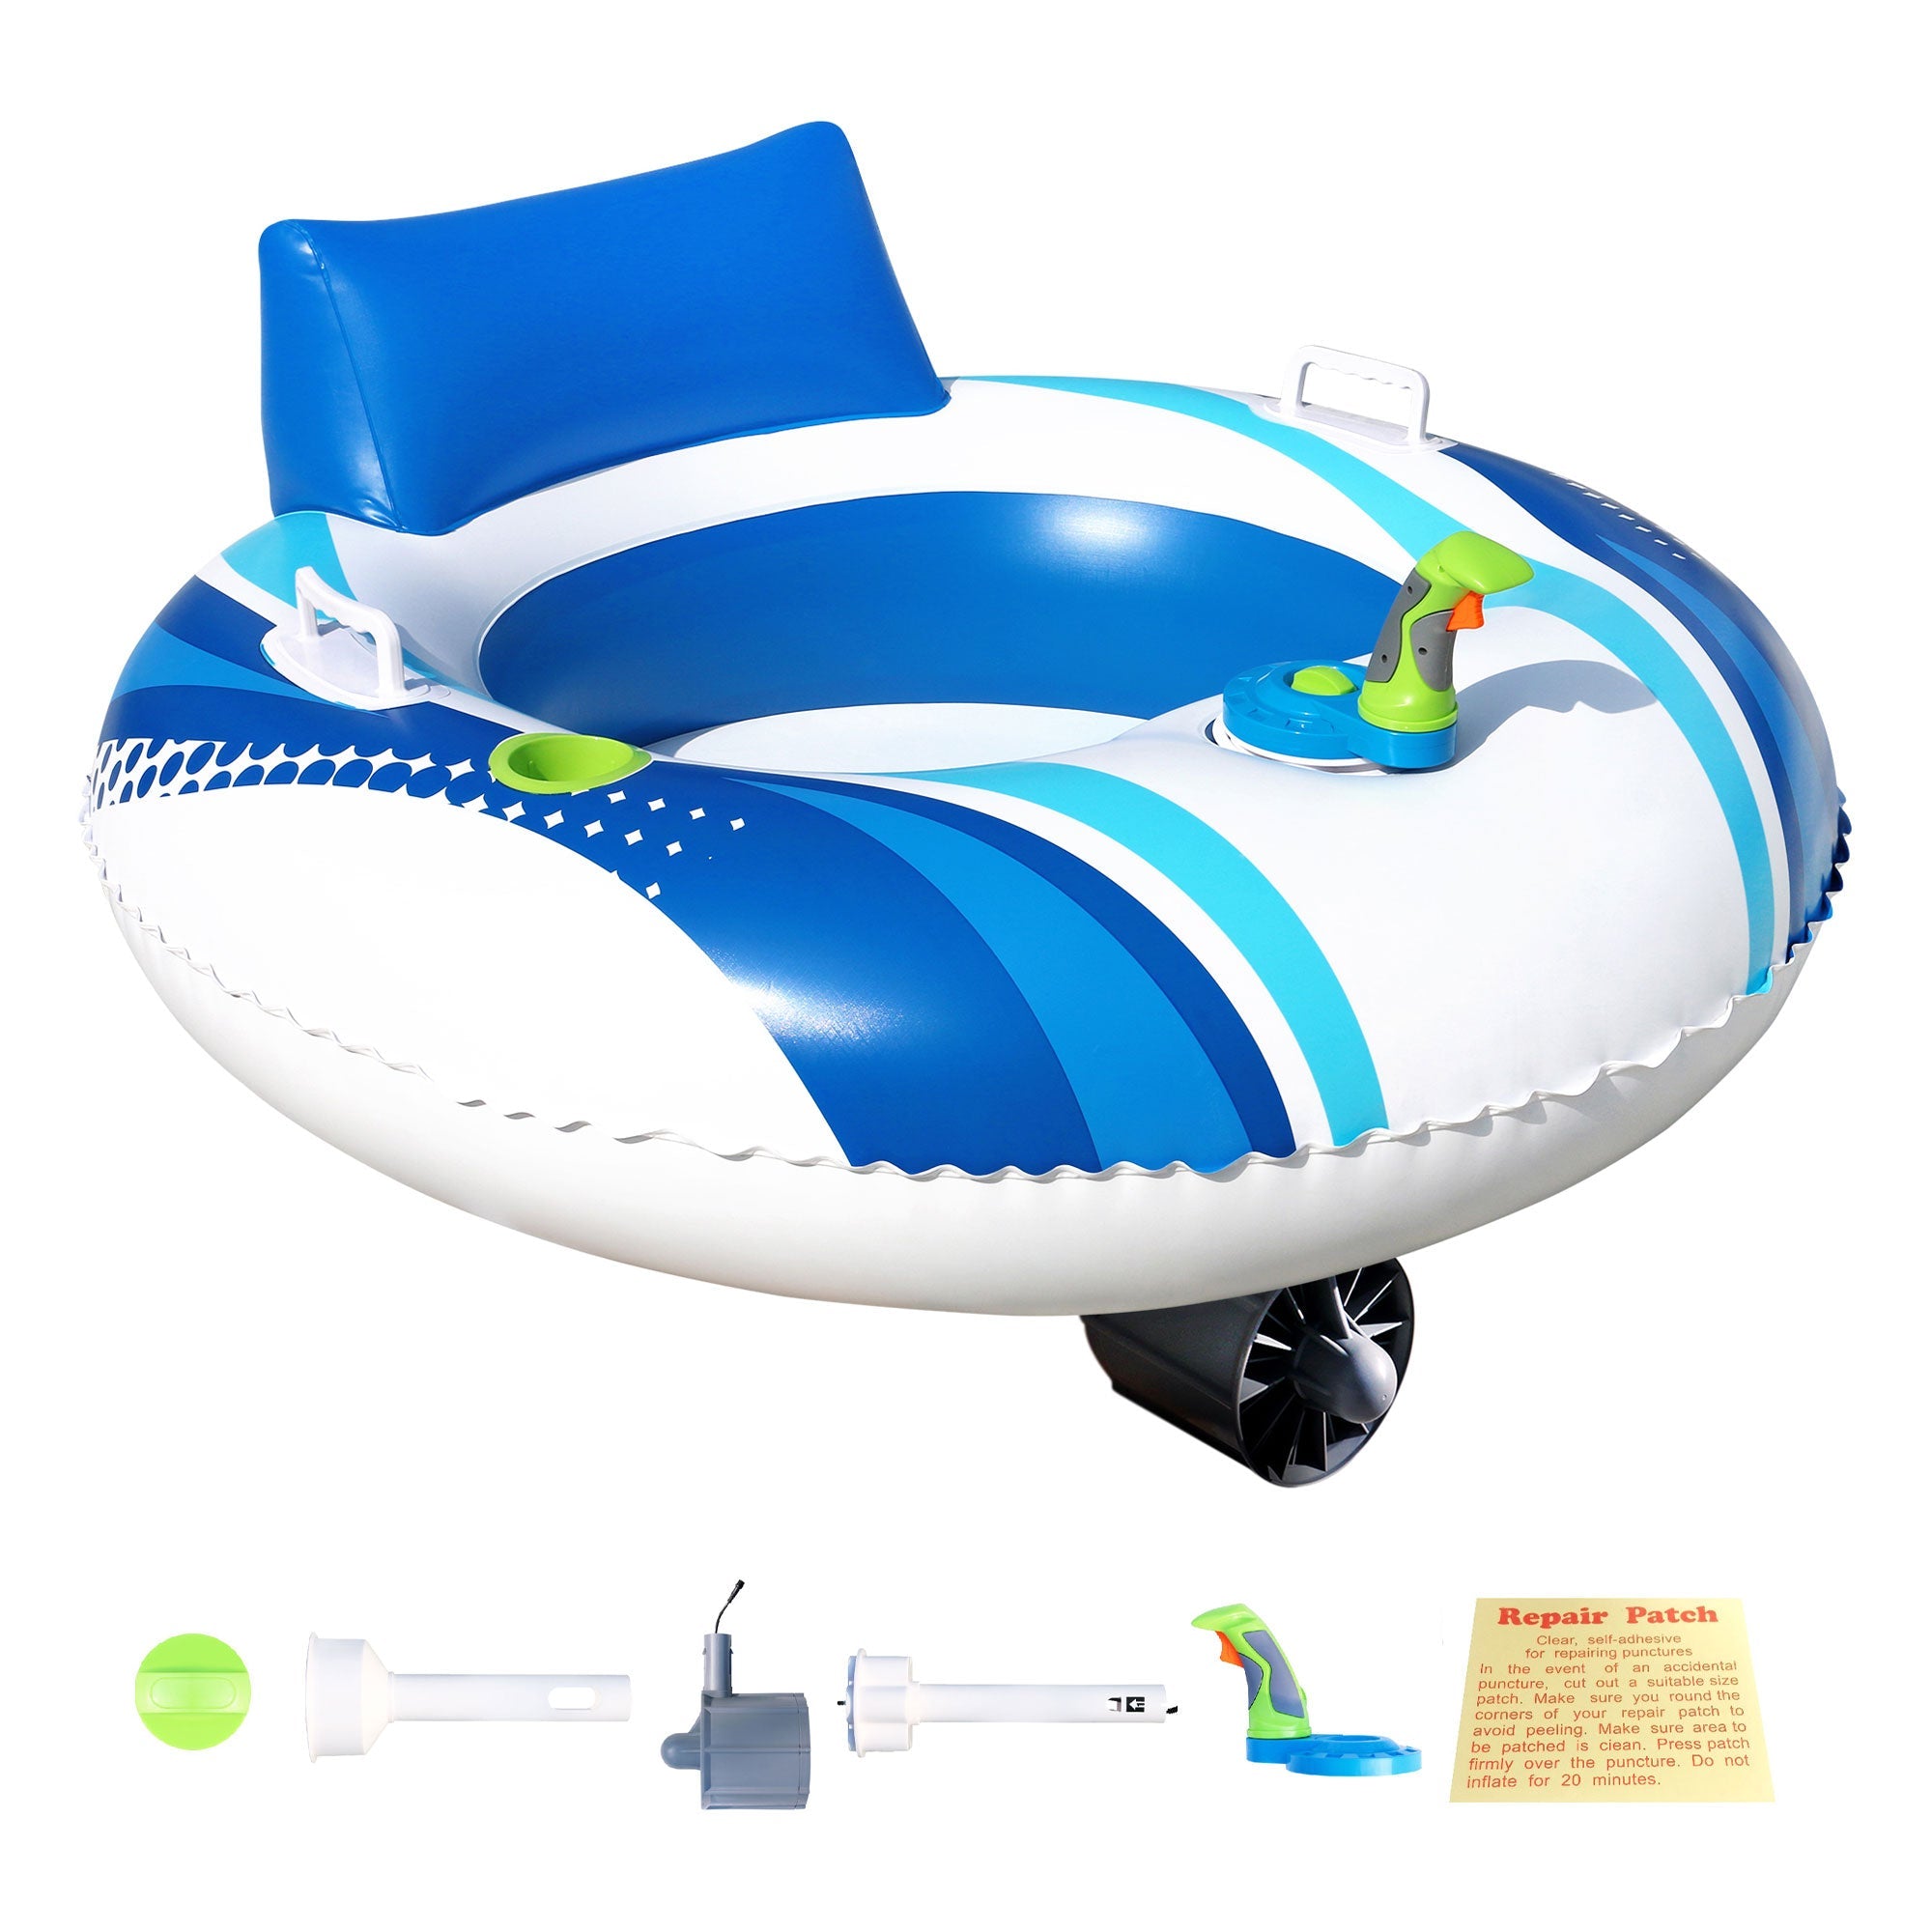 Banzai-Motorized-Battery-Powered-Inflatable-Pool-Cruiser-Float-for-Teens/Adults-Pool-Floats-&-Loungers